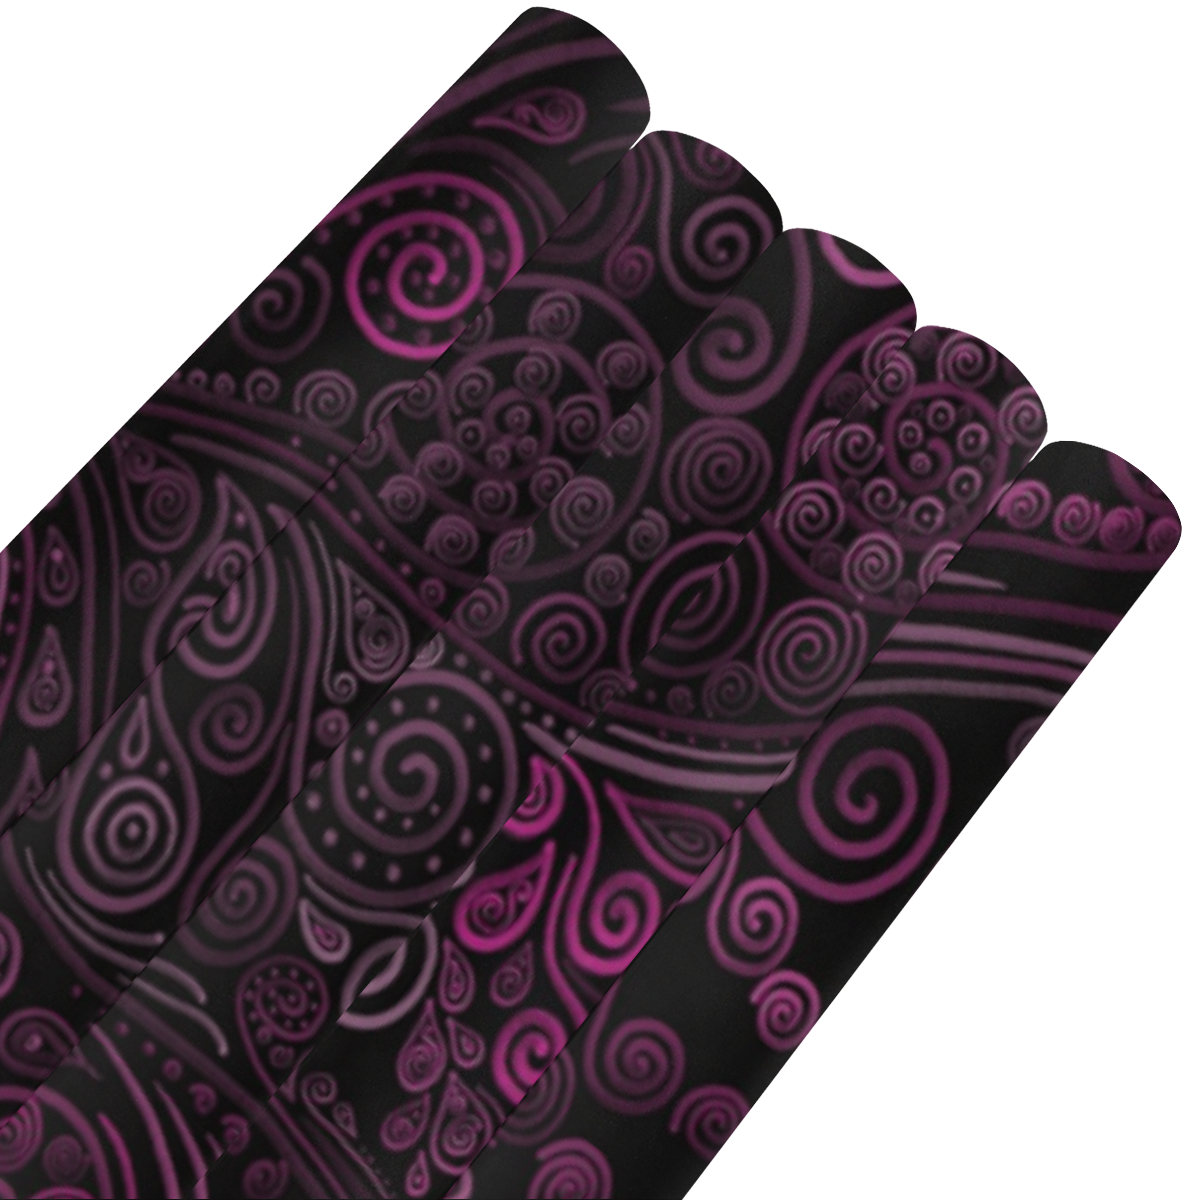 3D psychedelic ornaments, magenta Gift Wrapping Paper 58"x 23" (5 Rolls)